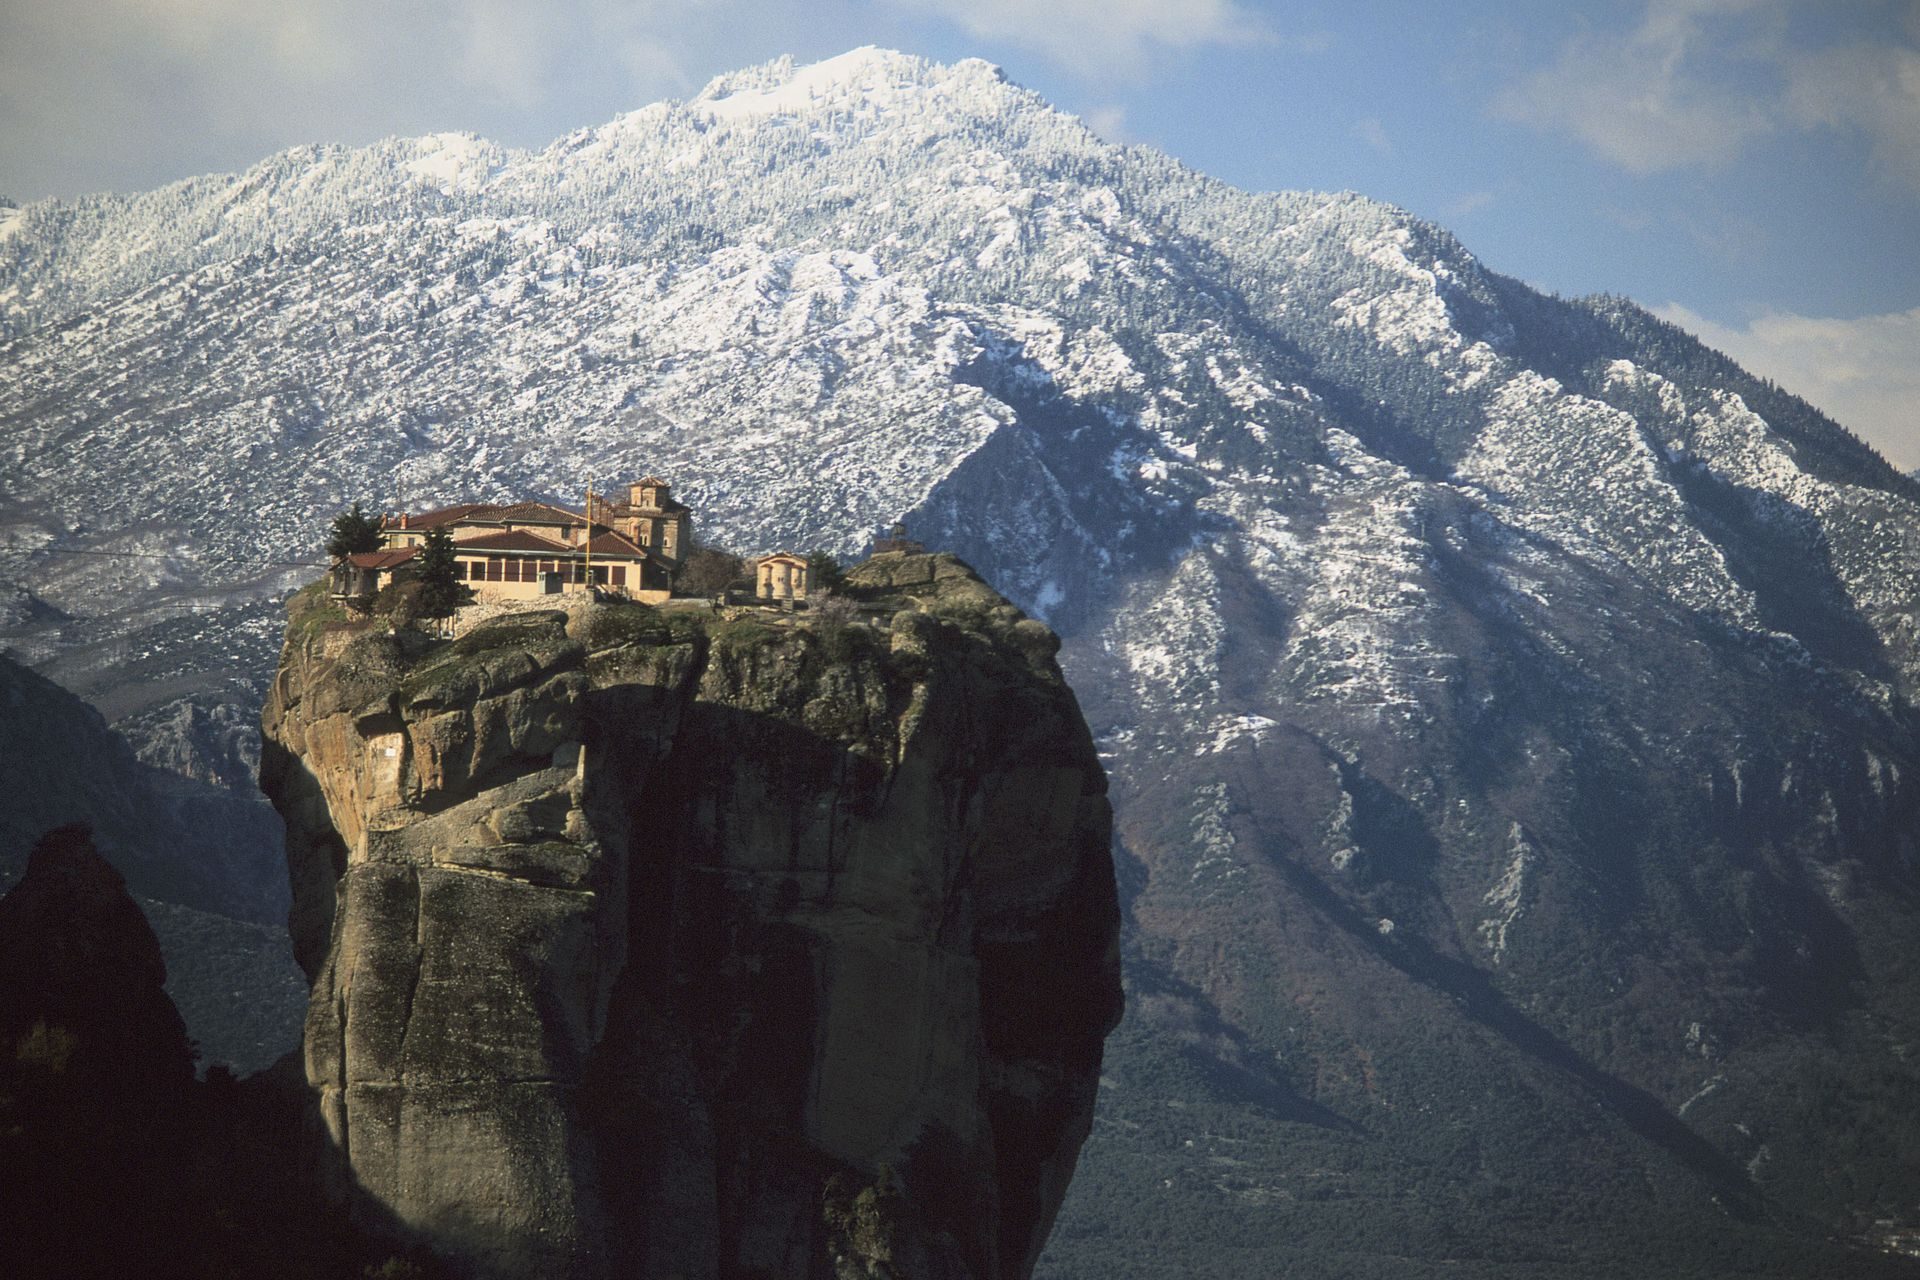 <p>In the heart of the country, the site of Meteora reveals a breathtaking landscape with gigantic sheer blocks of stone. Some of them are topped by monasteries. An impressive place to truly discover the soul of Greece.</p>